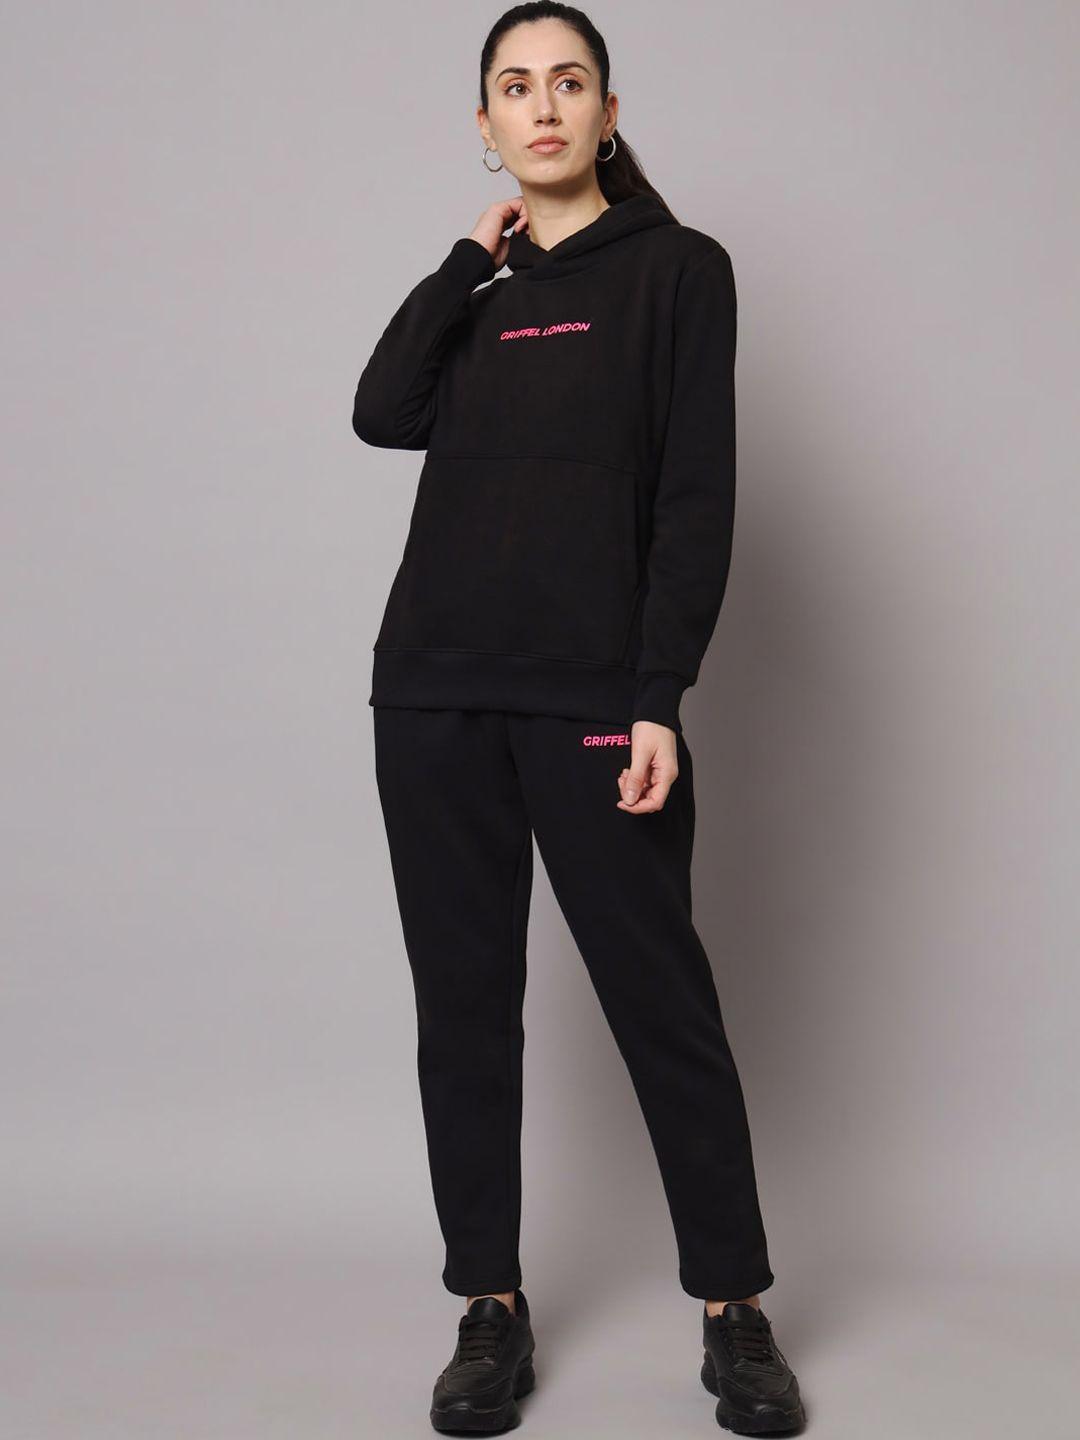 griffel women brand logo printed tracksuits